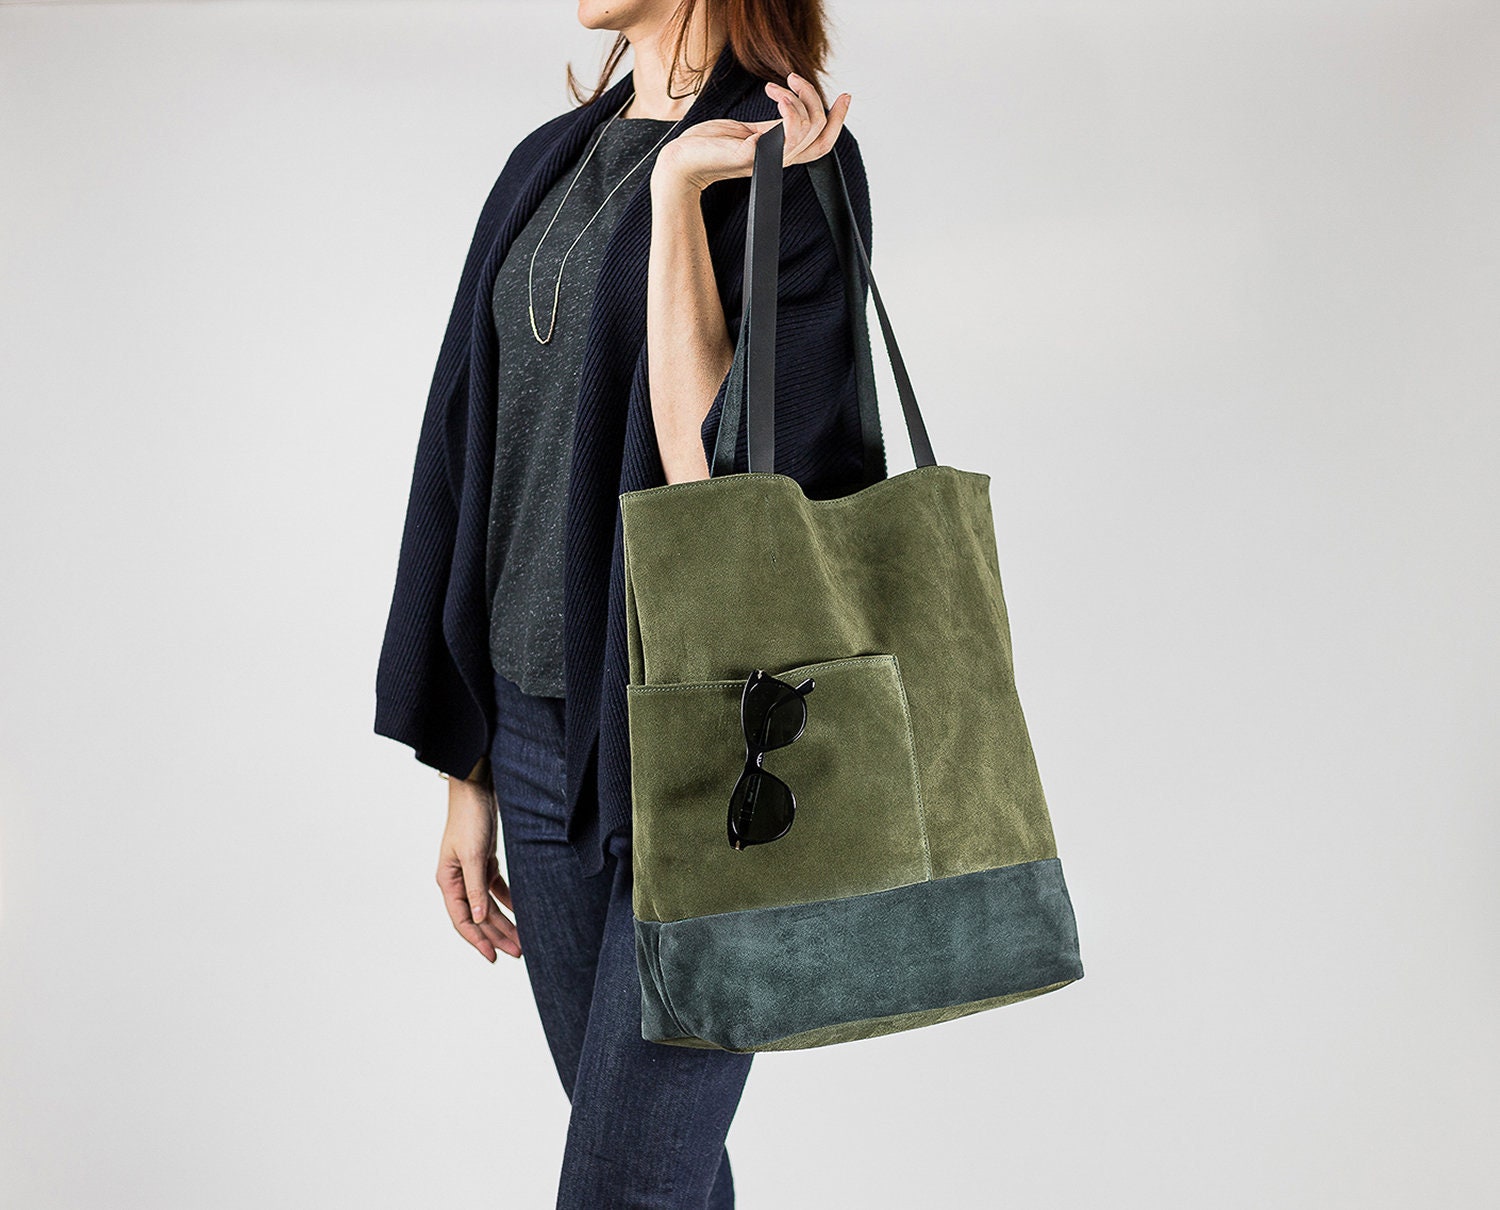 Navy Suede Tote Bag + Berry-Forest Green-Navy Twill Crossbody Strap Set, Custom Bags